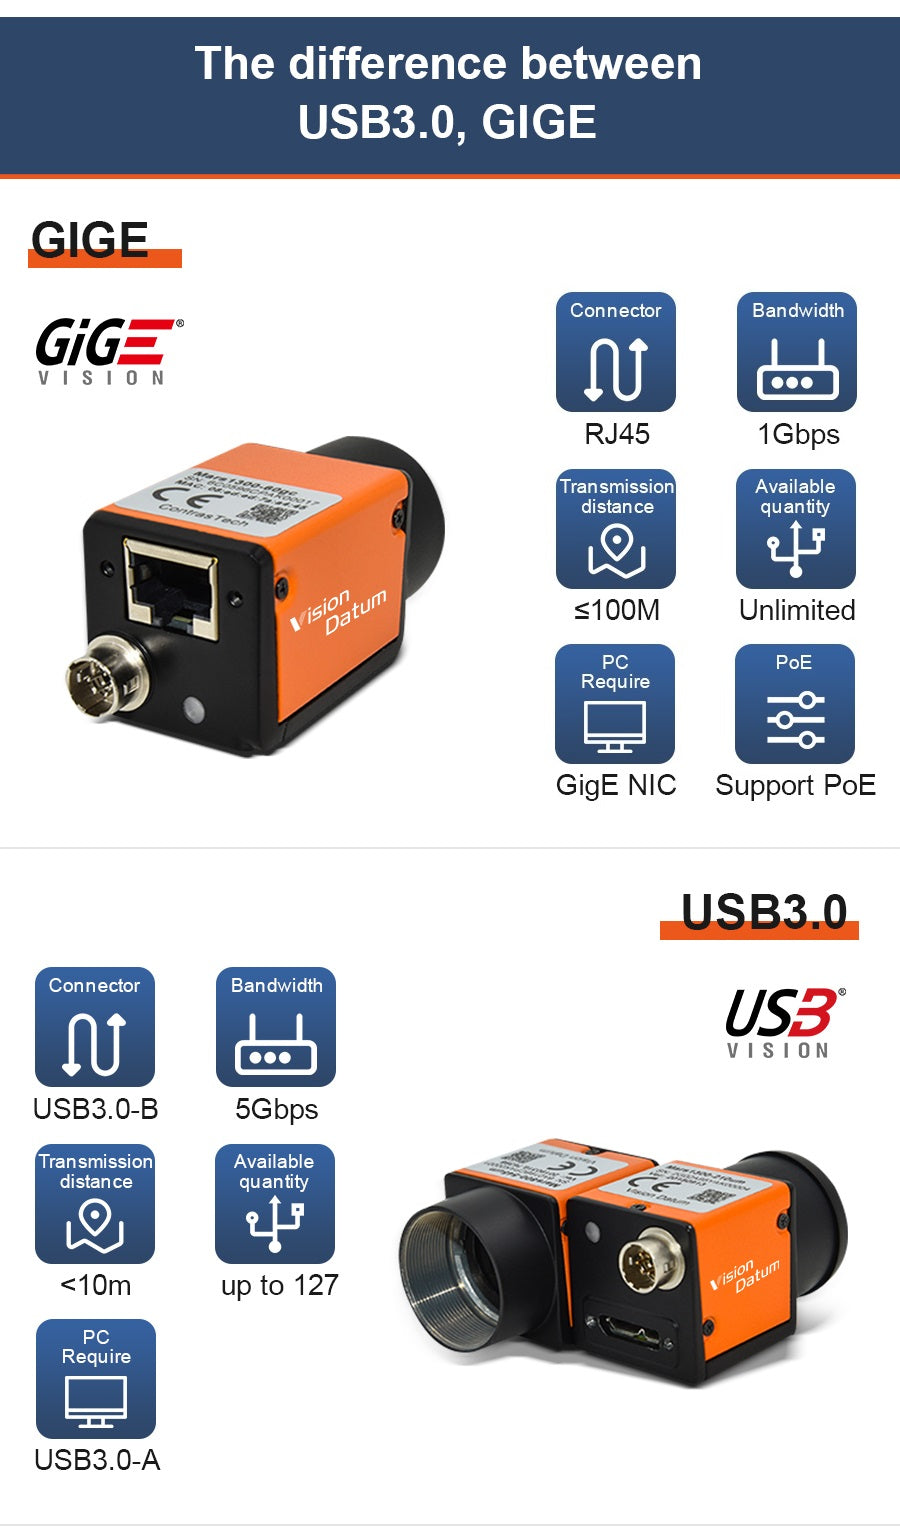 The difference between USB3.0 GIGE camera